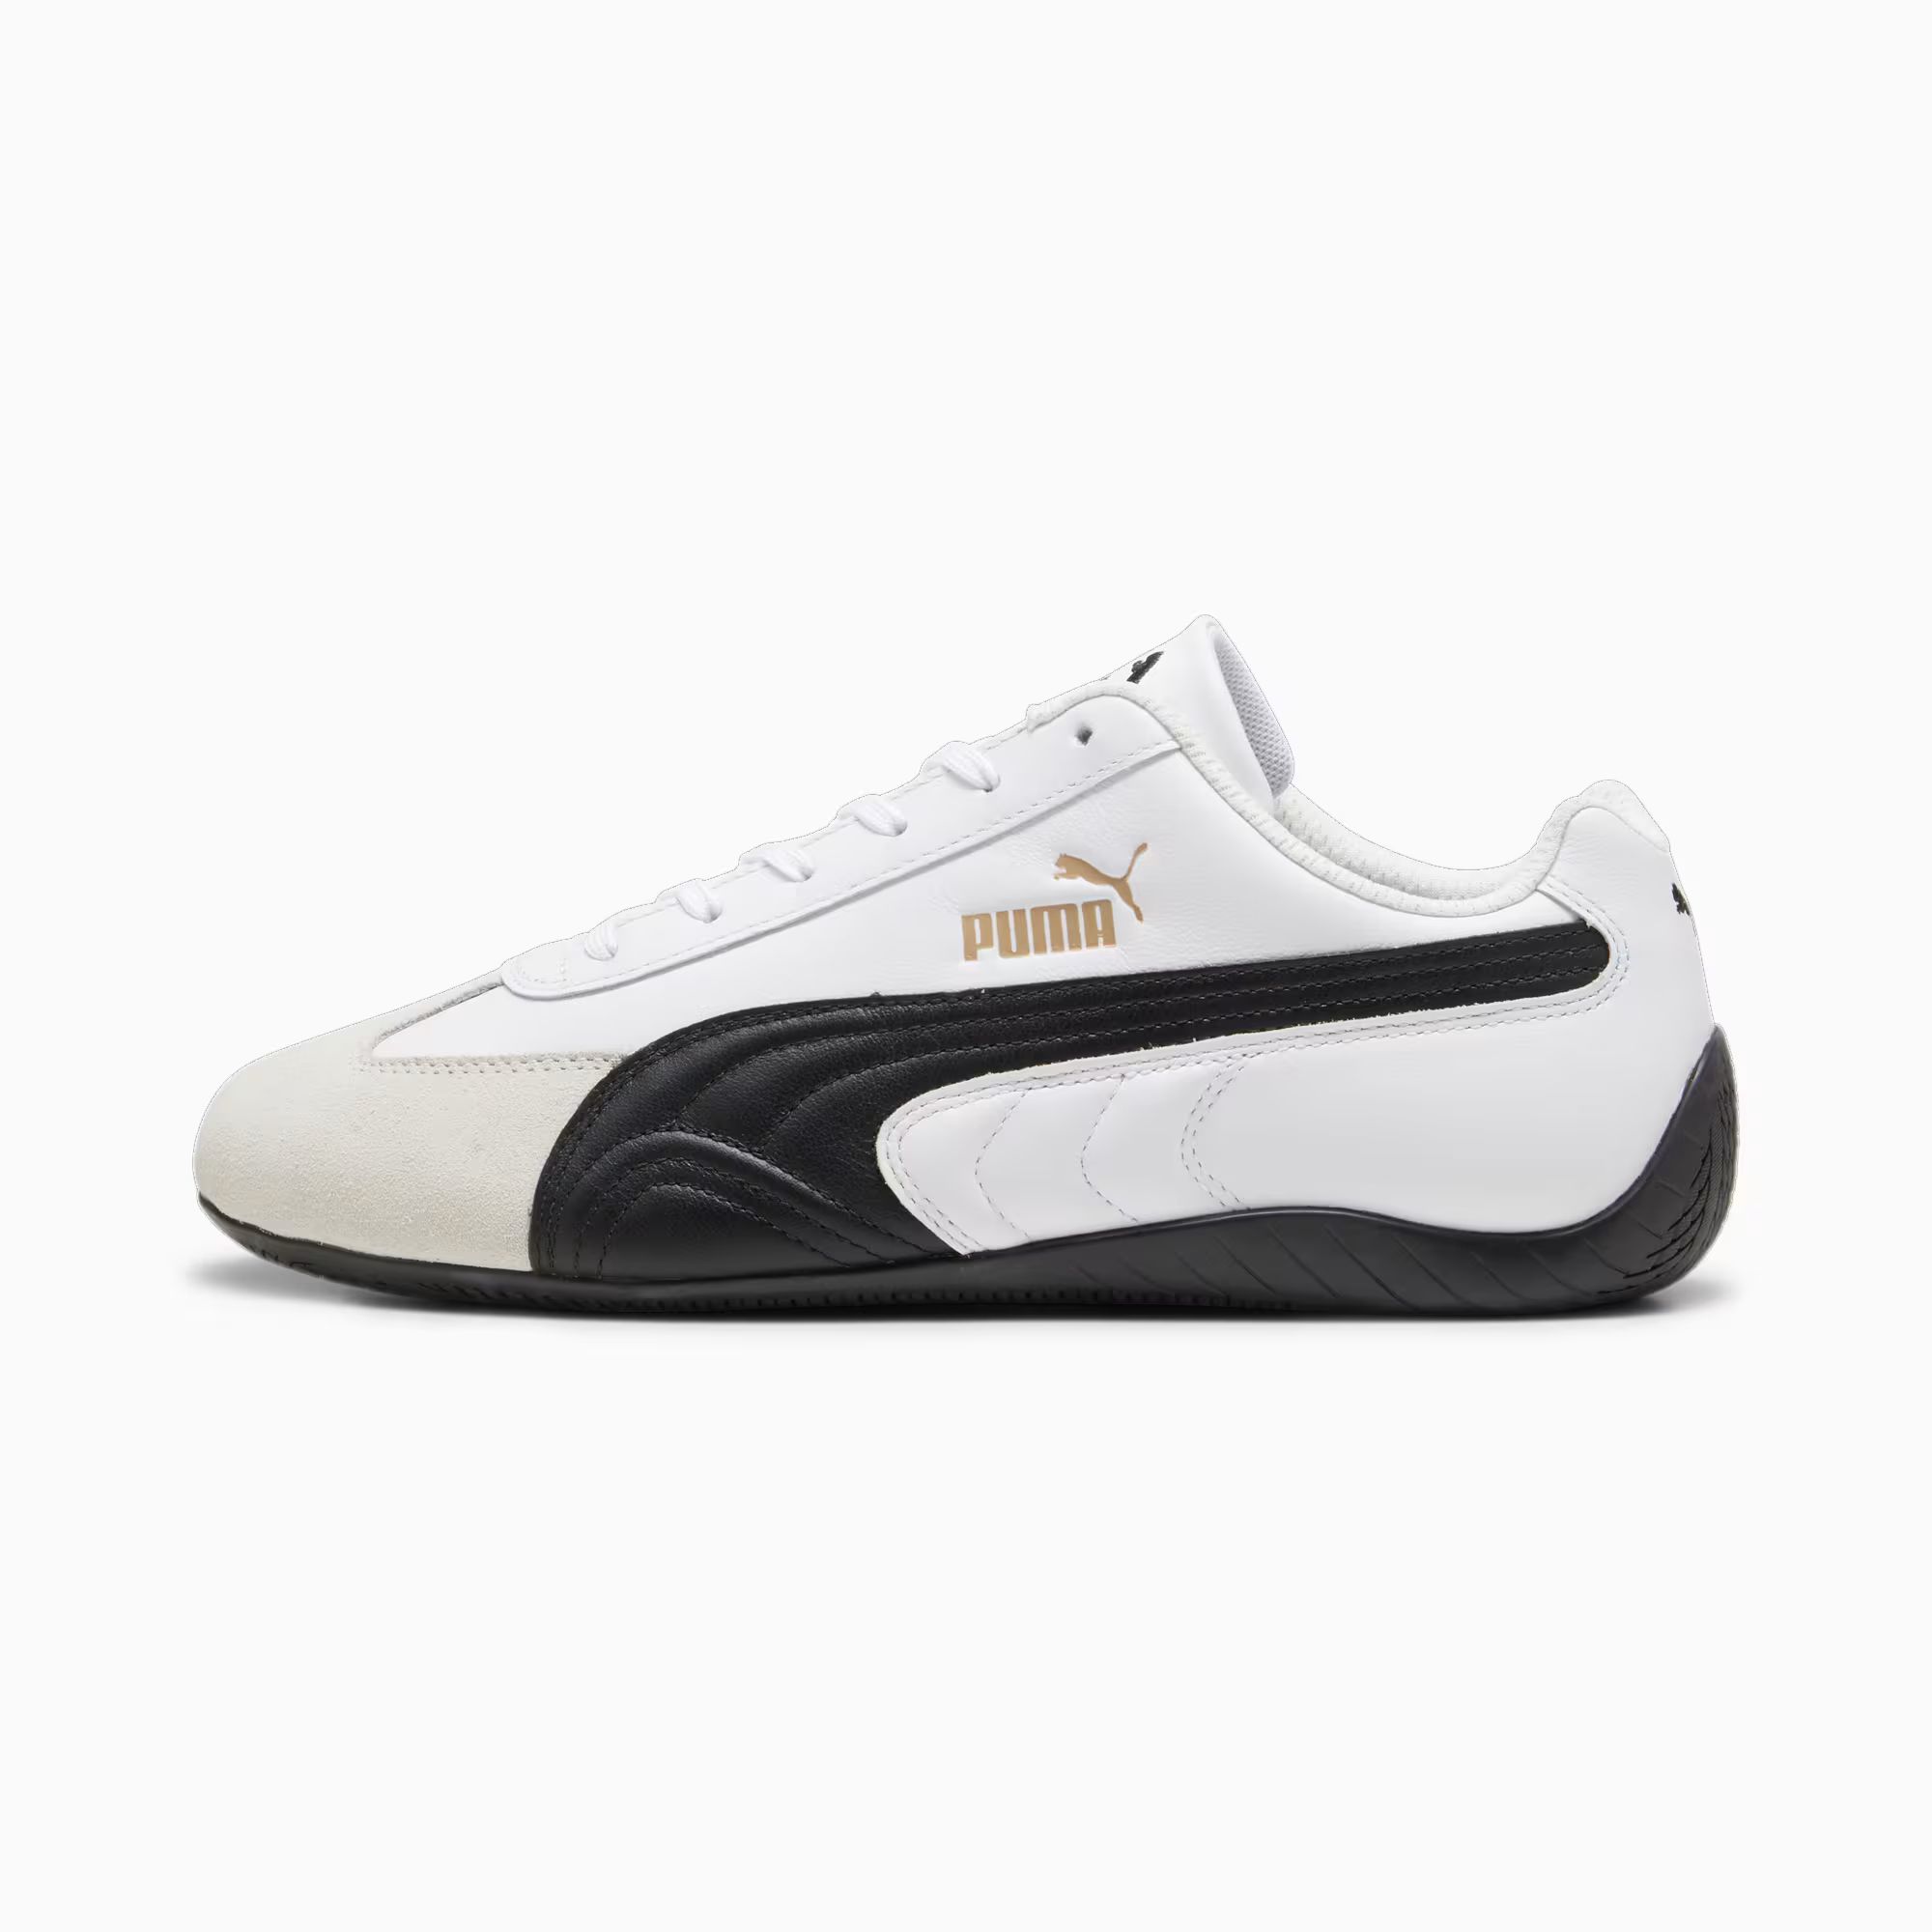 Men's Shoes and Sneakers | PUMA US